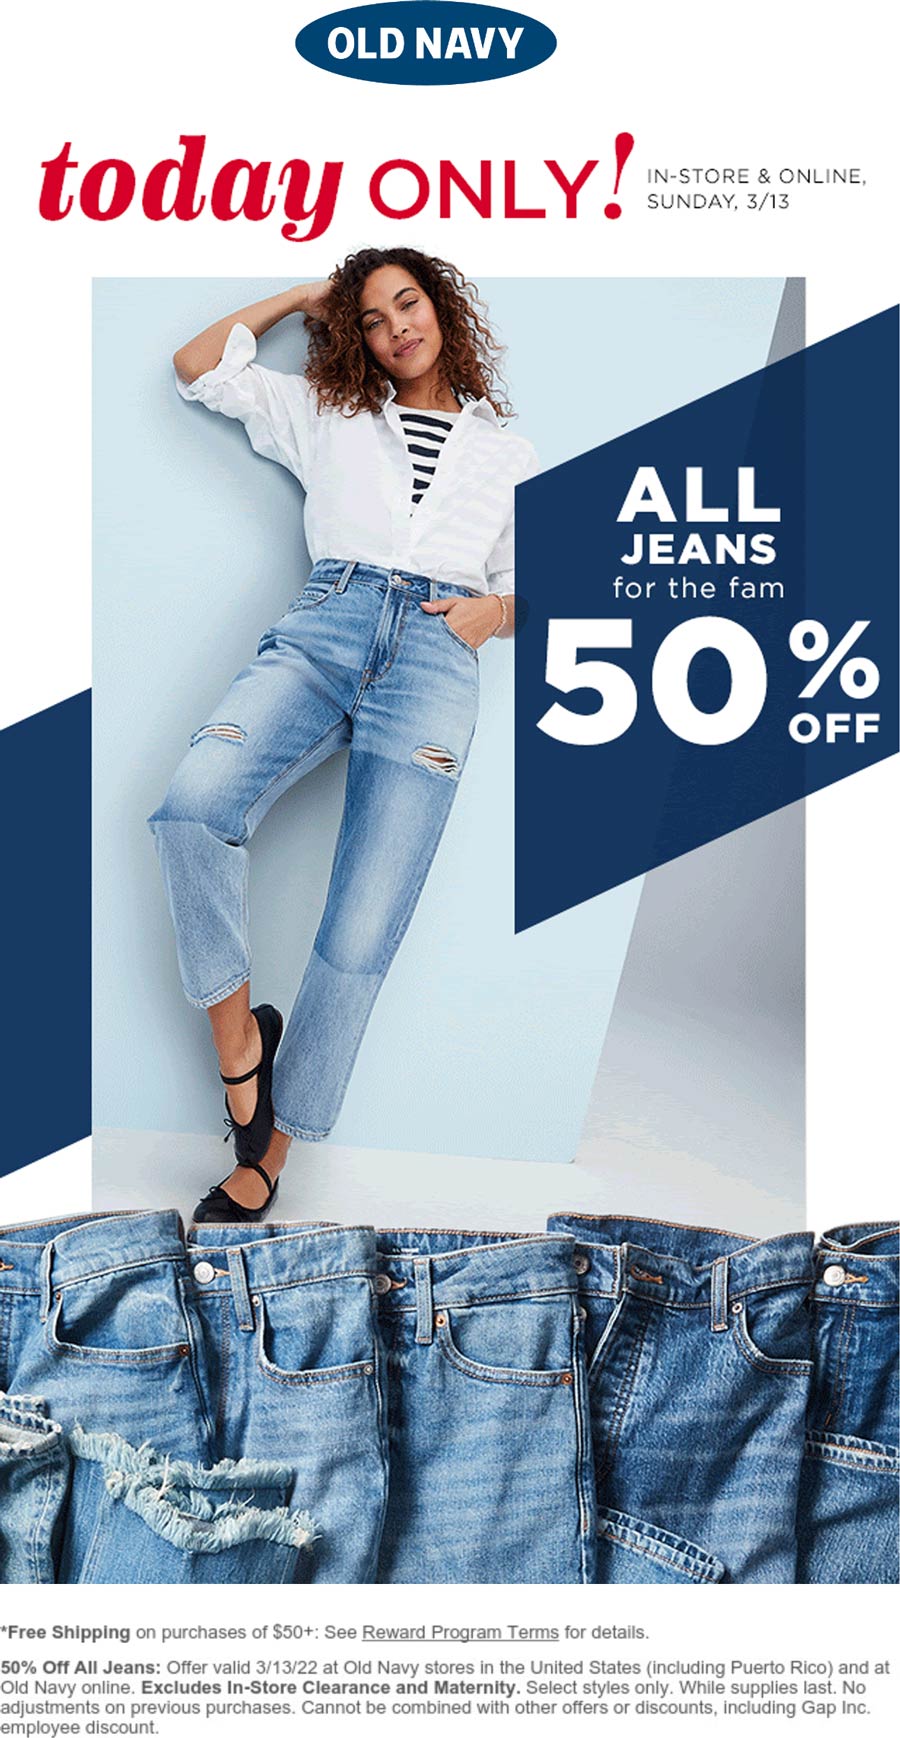 Old Navy stores Coupon  50% off all jeans today at Old Navy, ditto online #oldnavy 